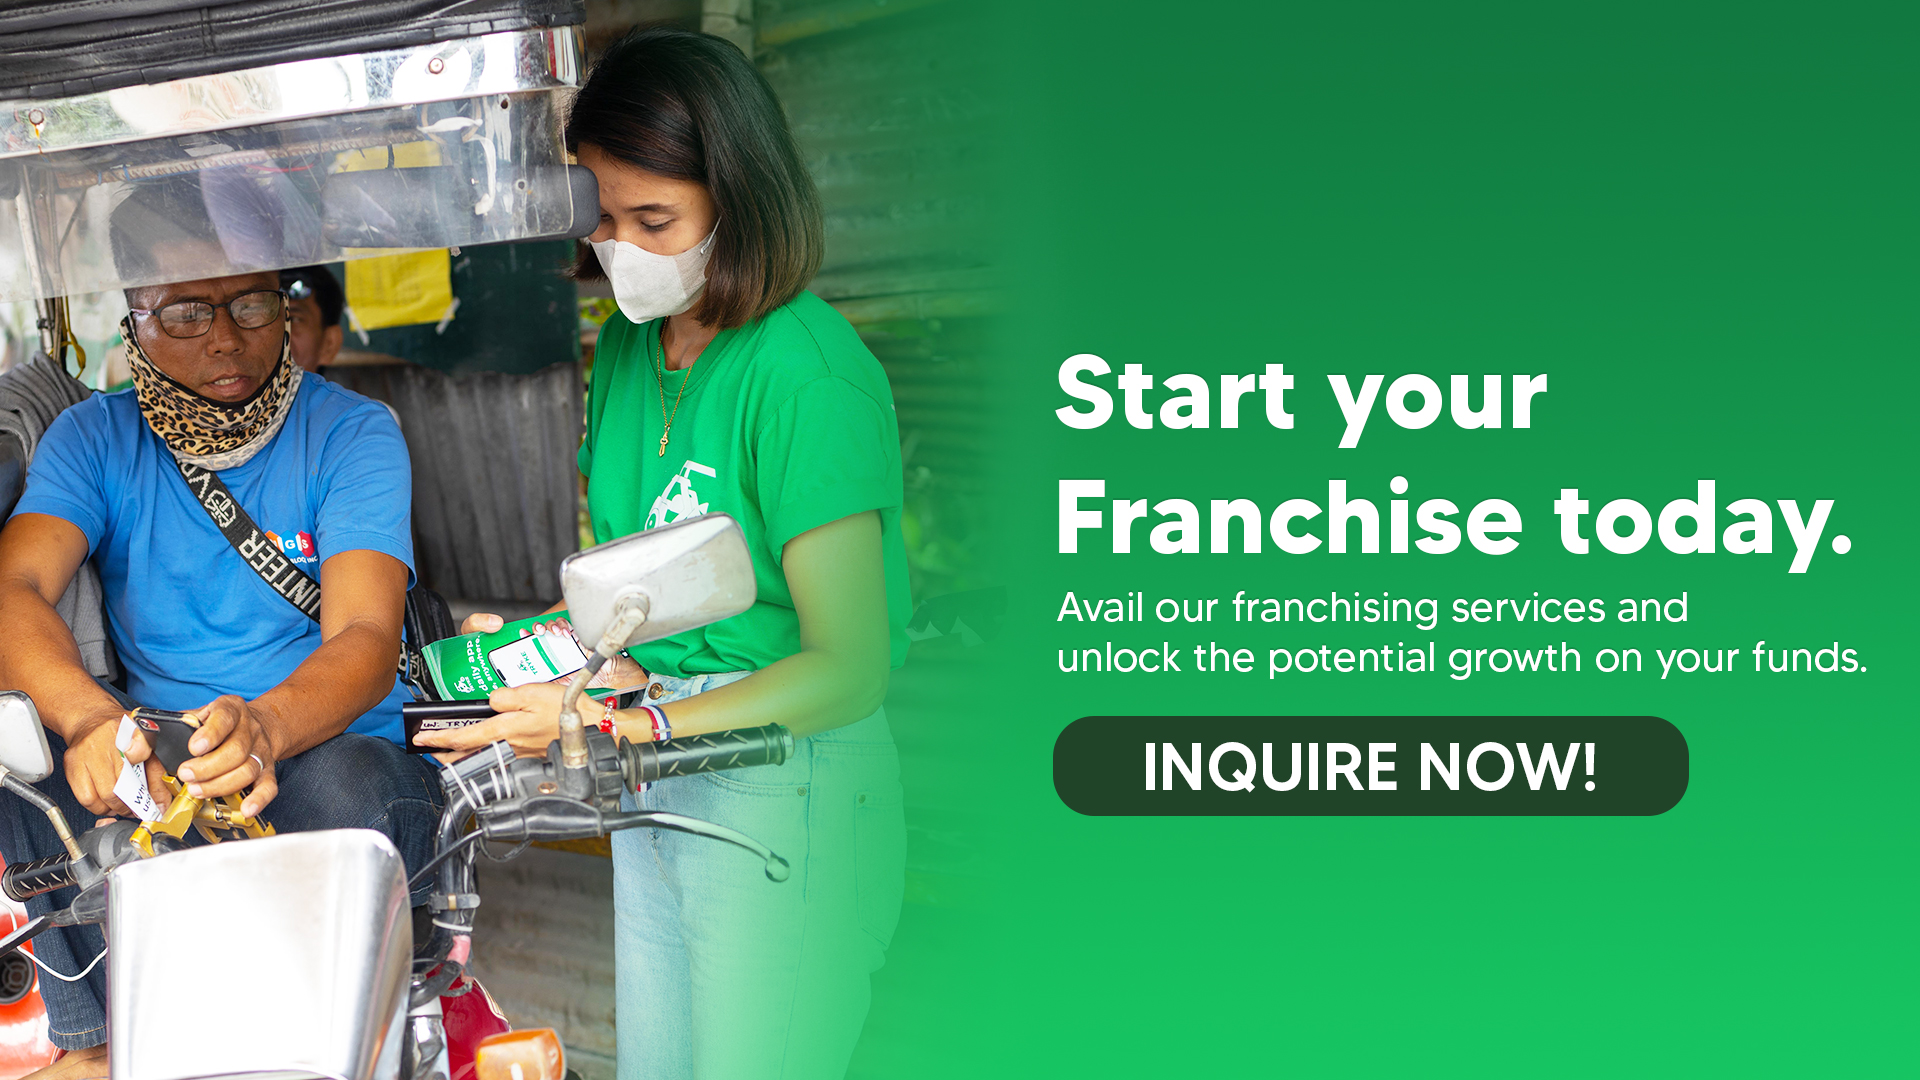 Start your franchise today at tryke